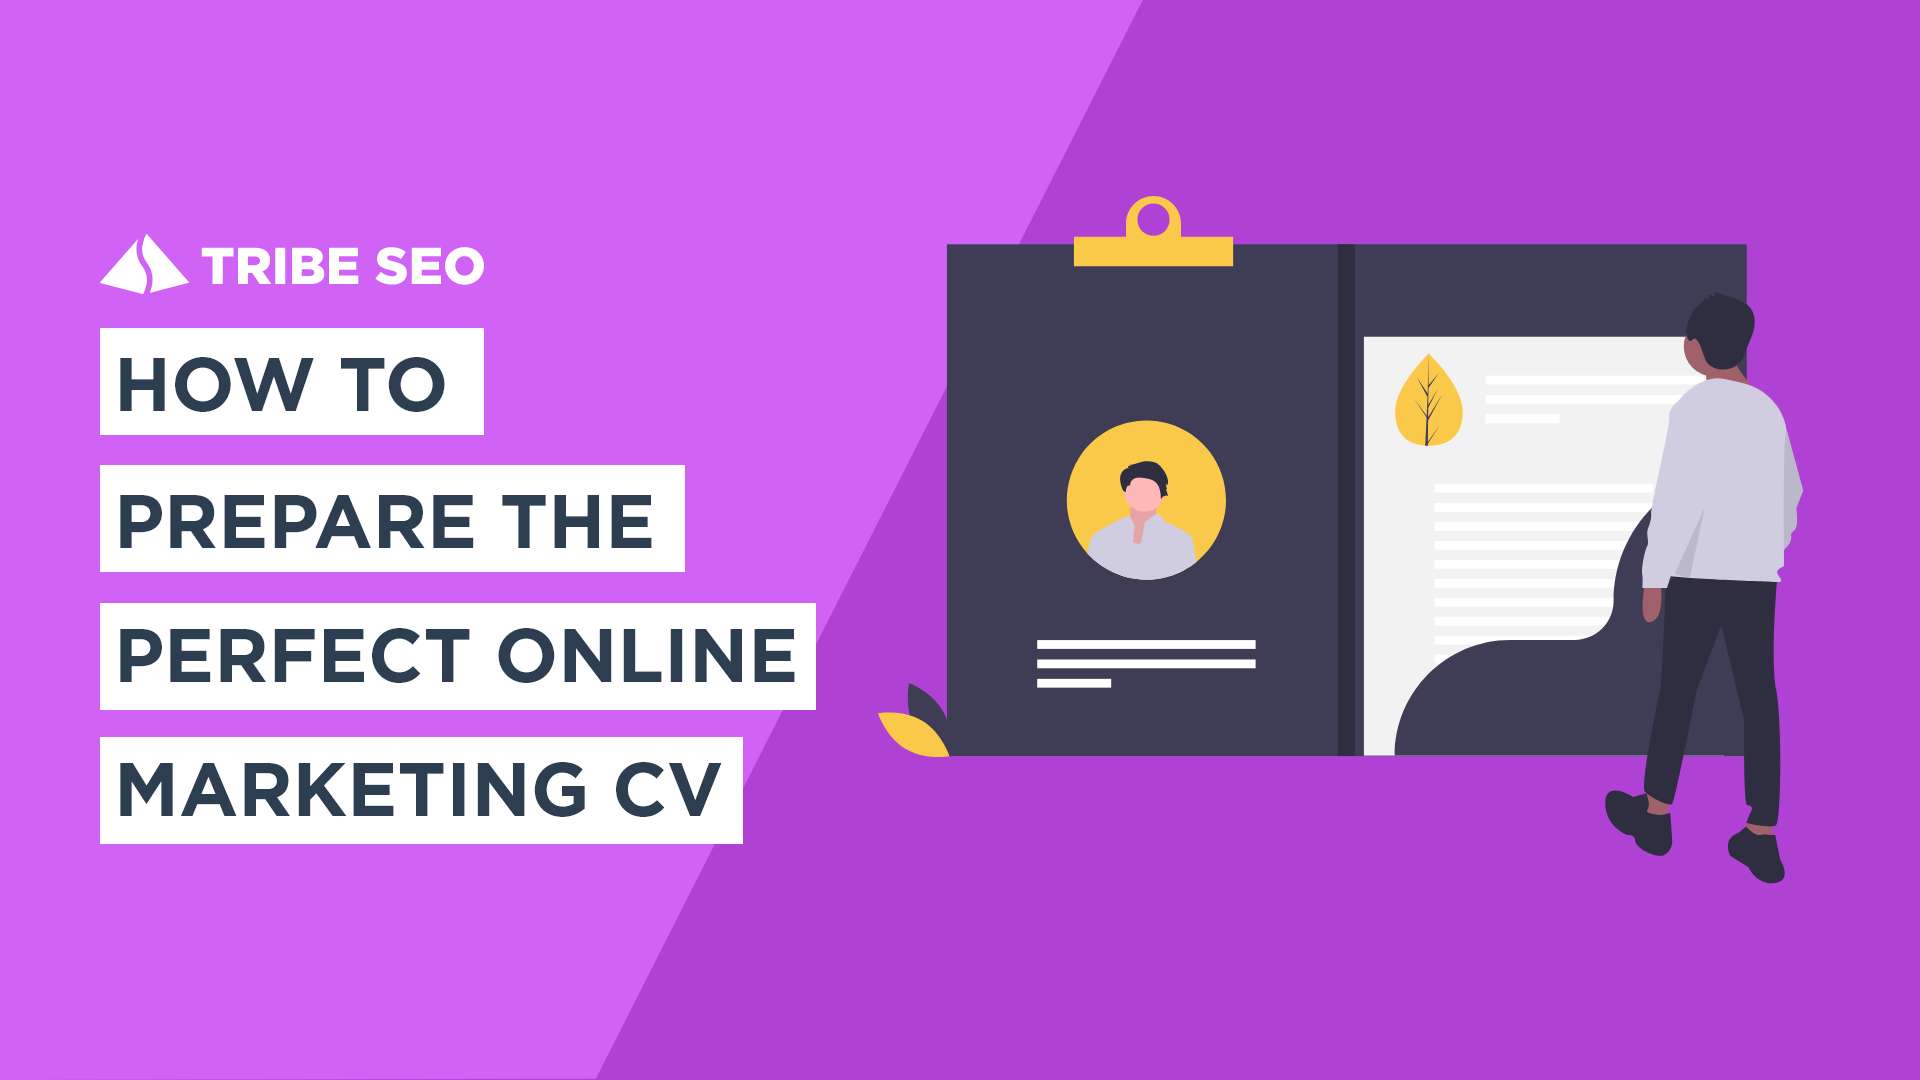 How to Prepare the Perfect Online Marketing CV